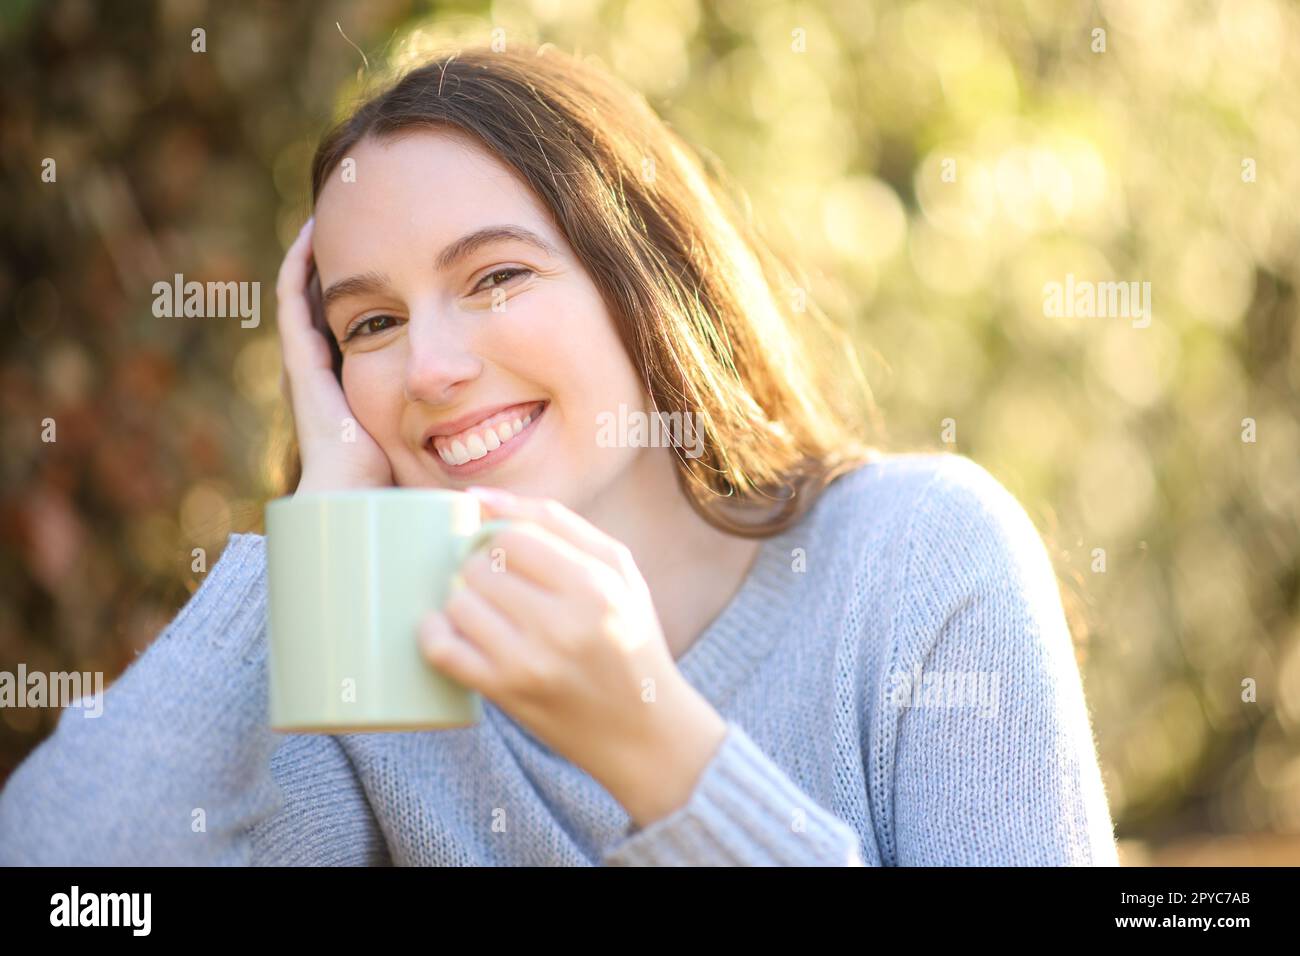 Happy woman looks at camera holding coffee cup Stock Photo